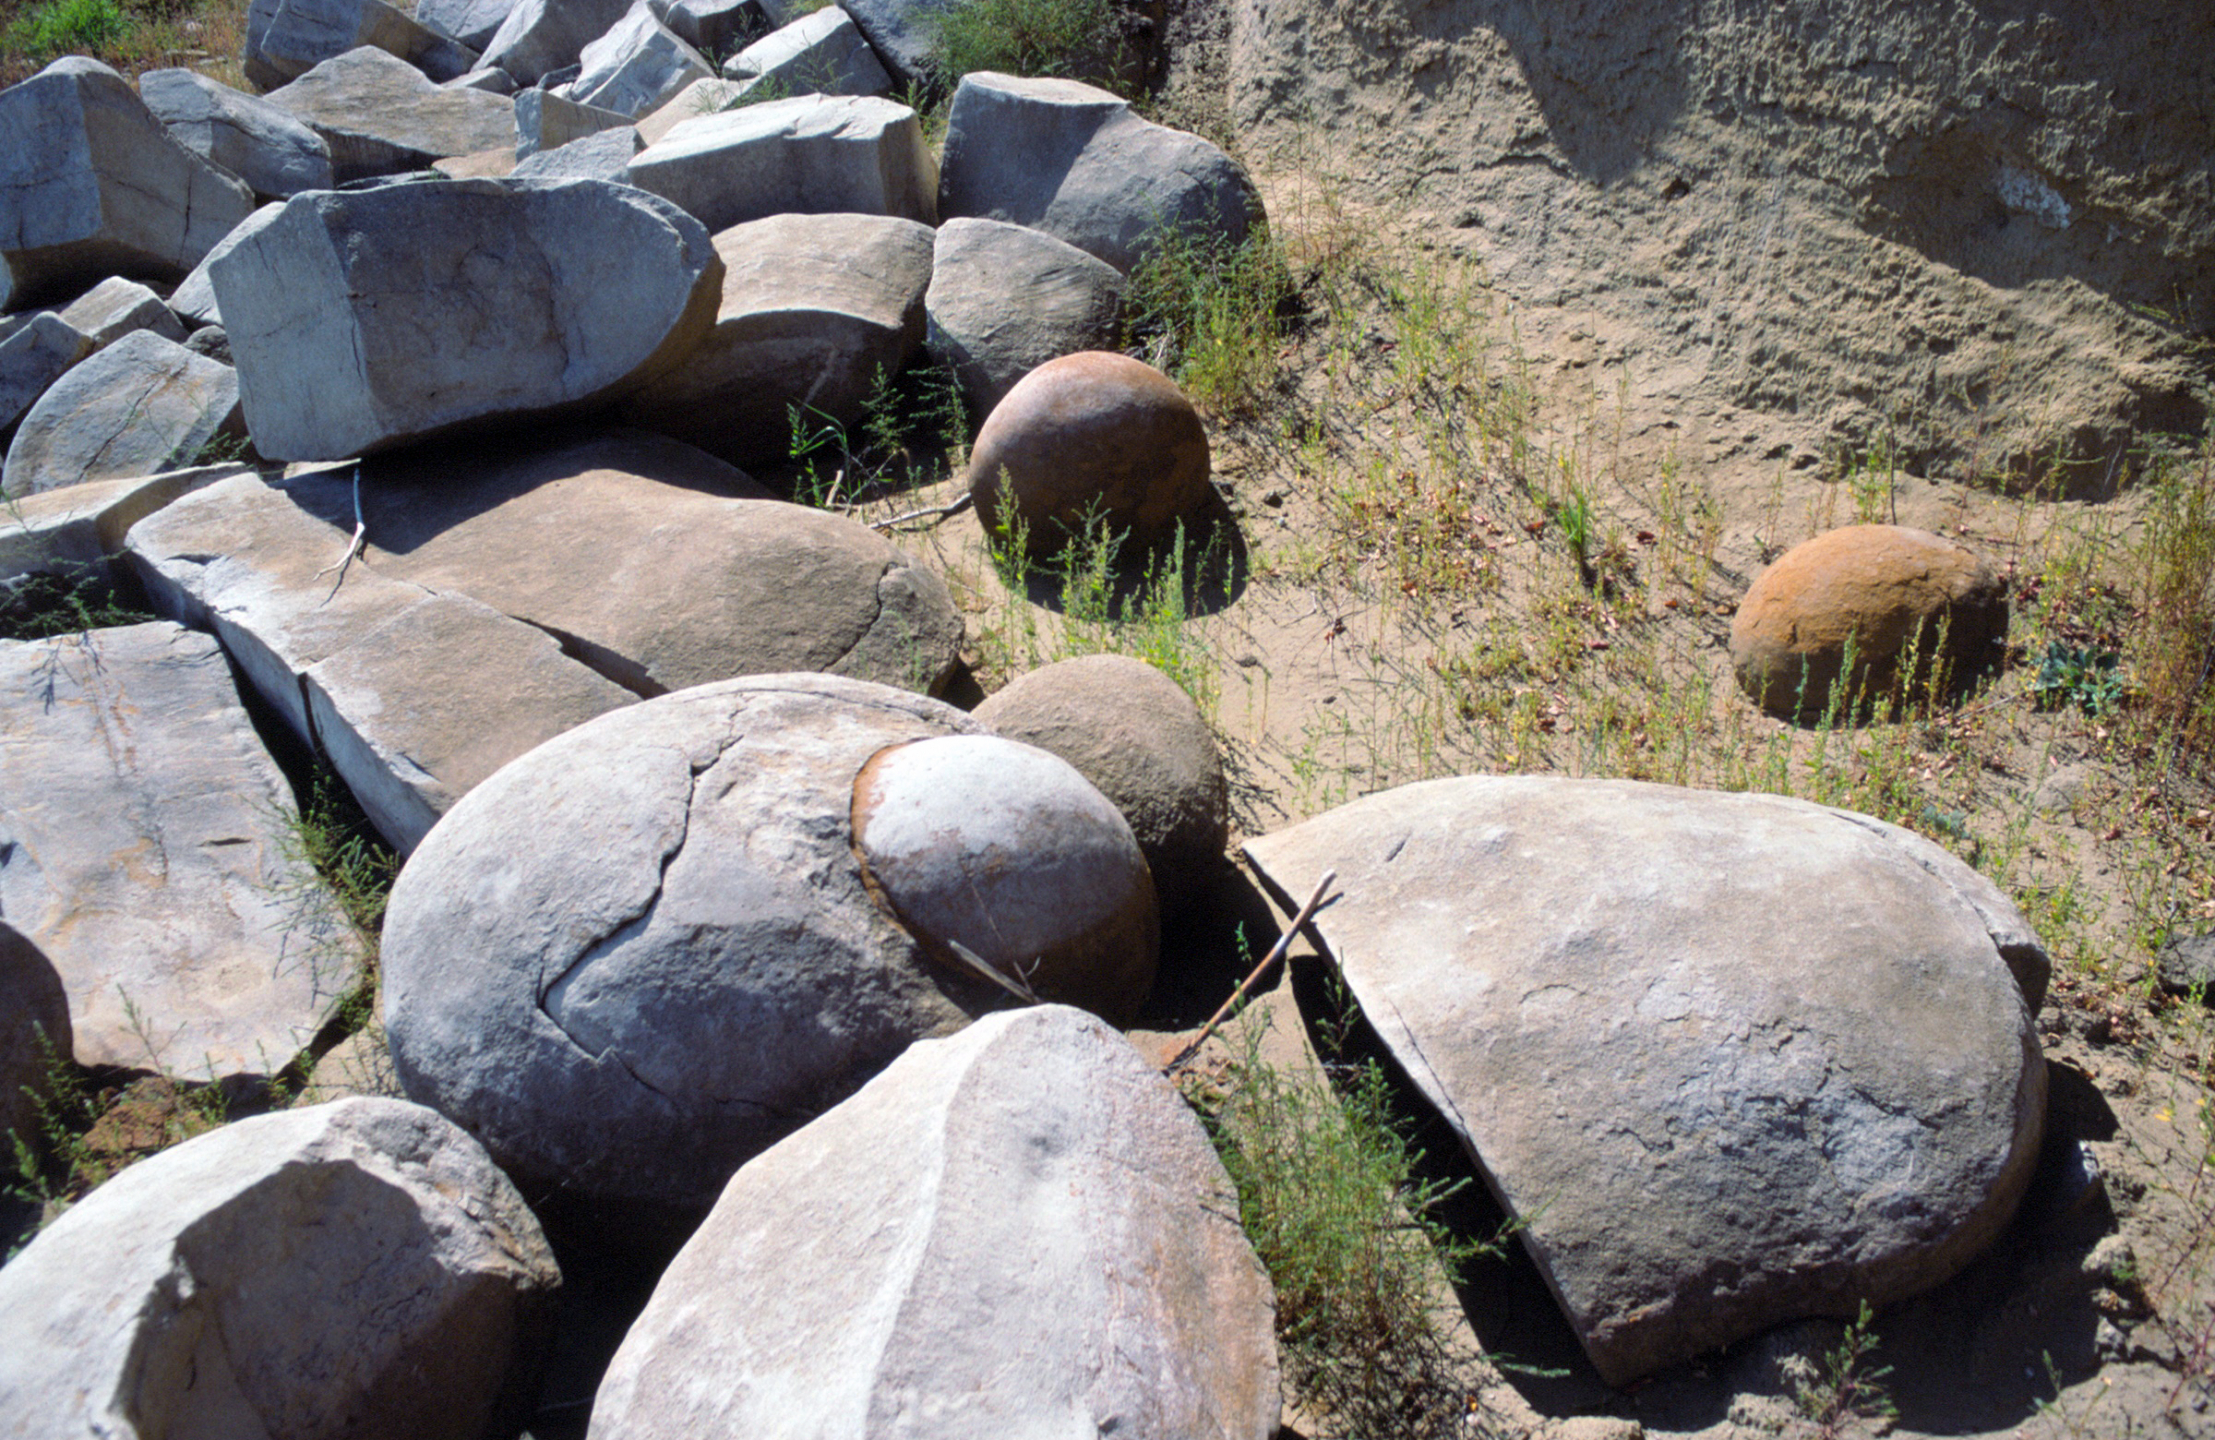 Photo of different shapes and sizes of stones.